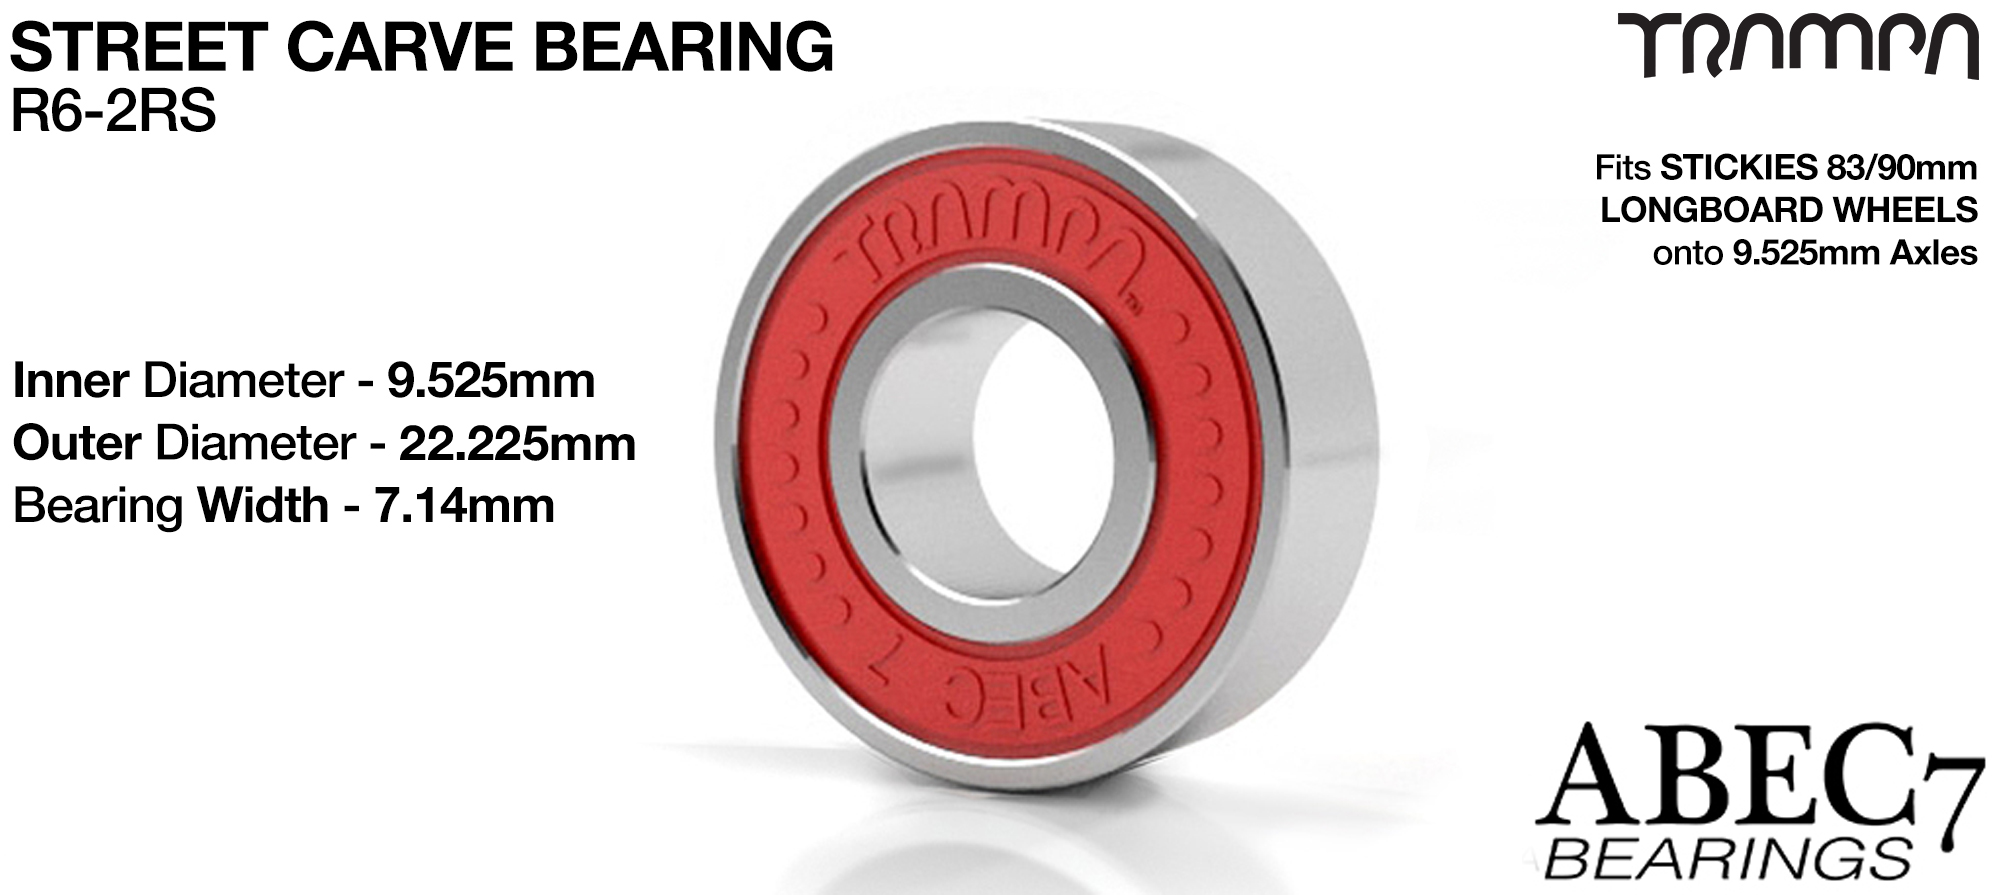 2x RED ABEC 7 R6-2RS 9.525mm Bearings (+£5)